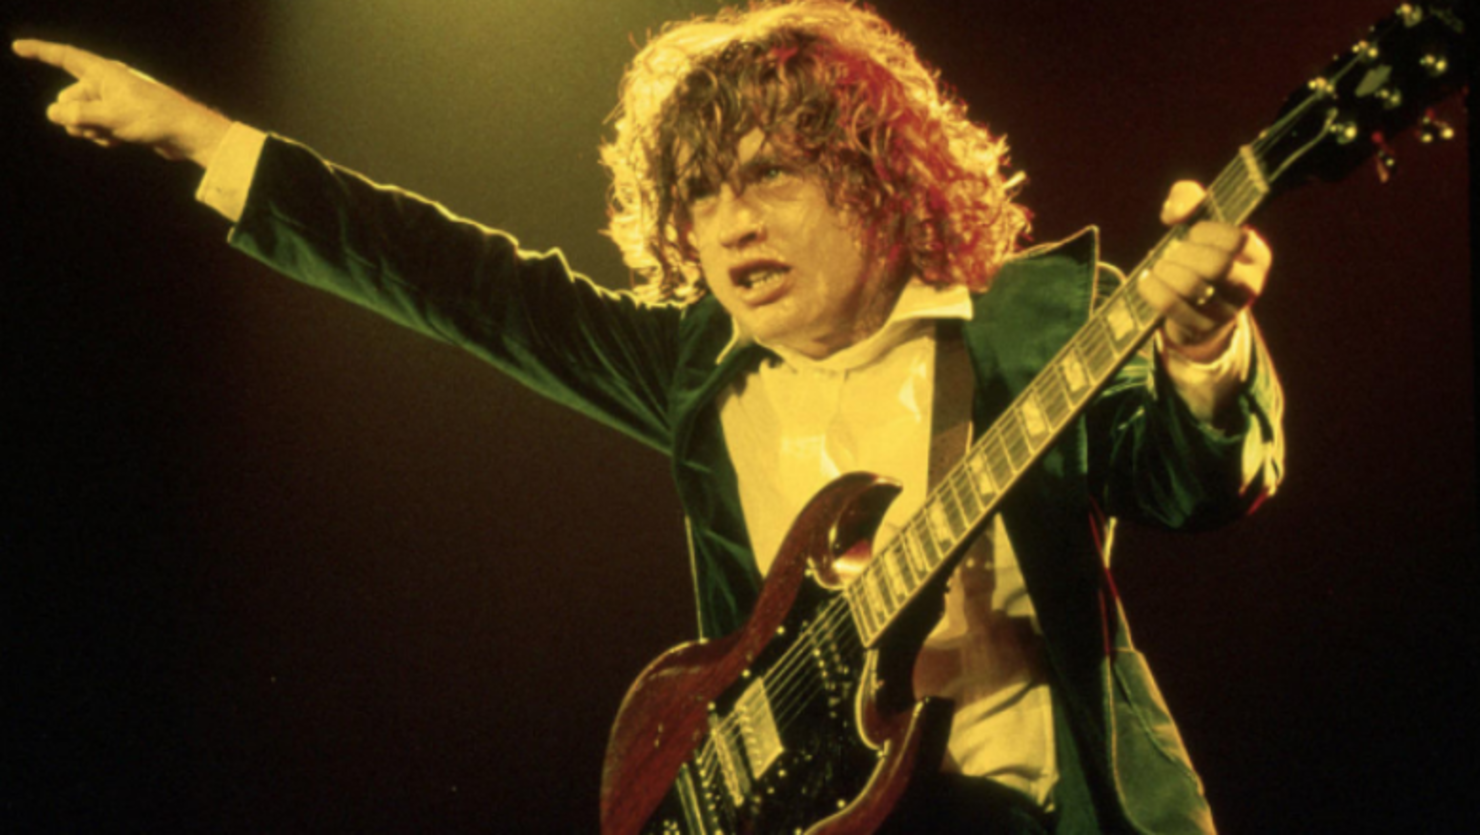 Angus Young - wide 4